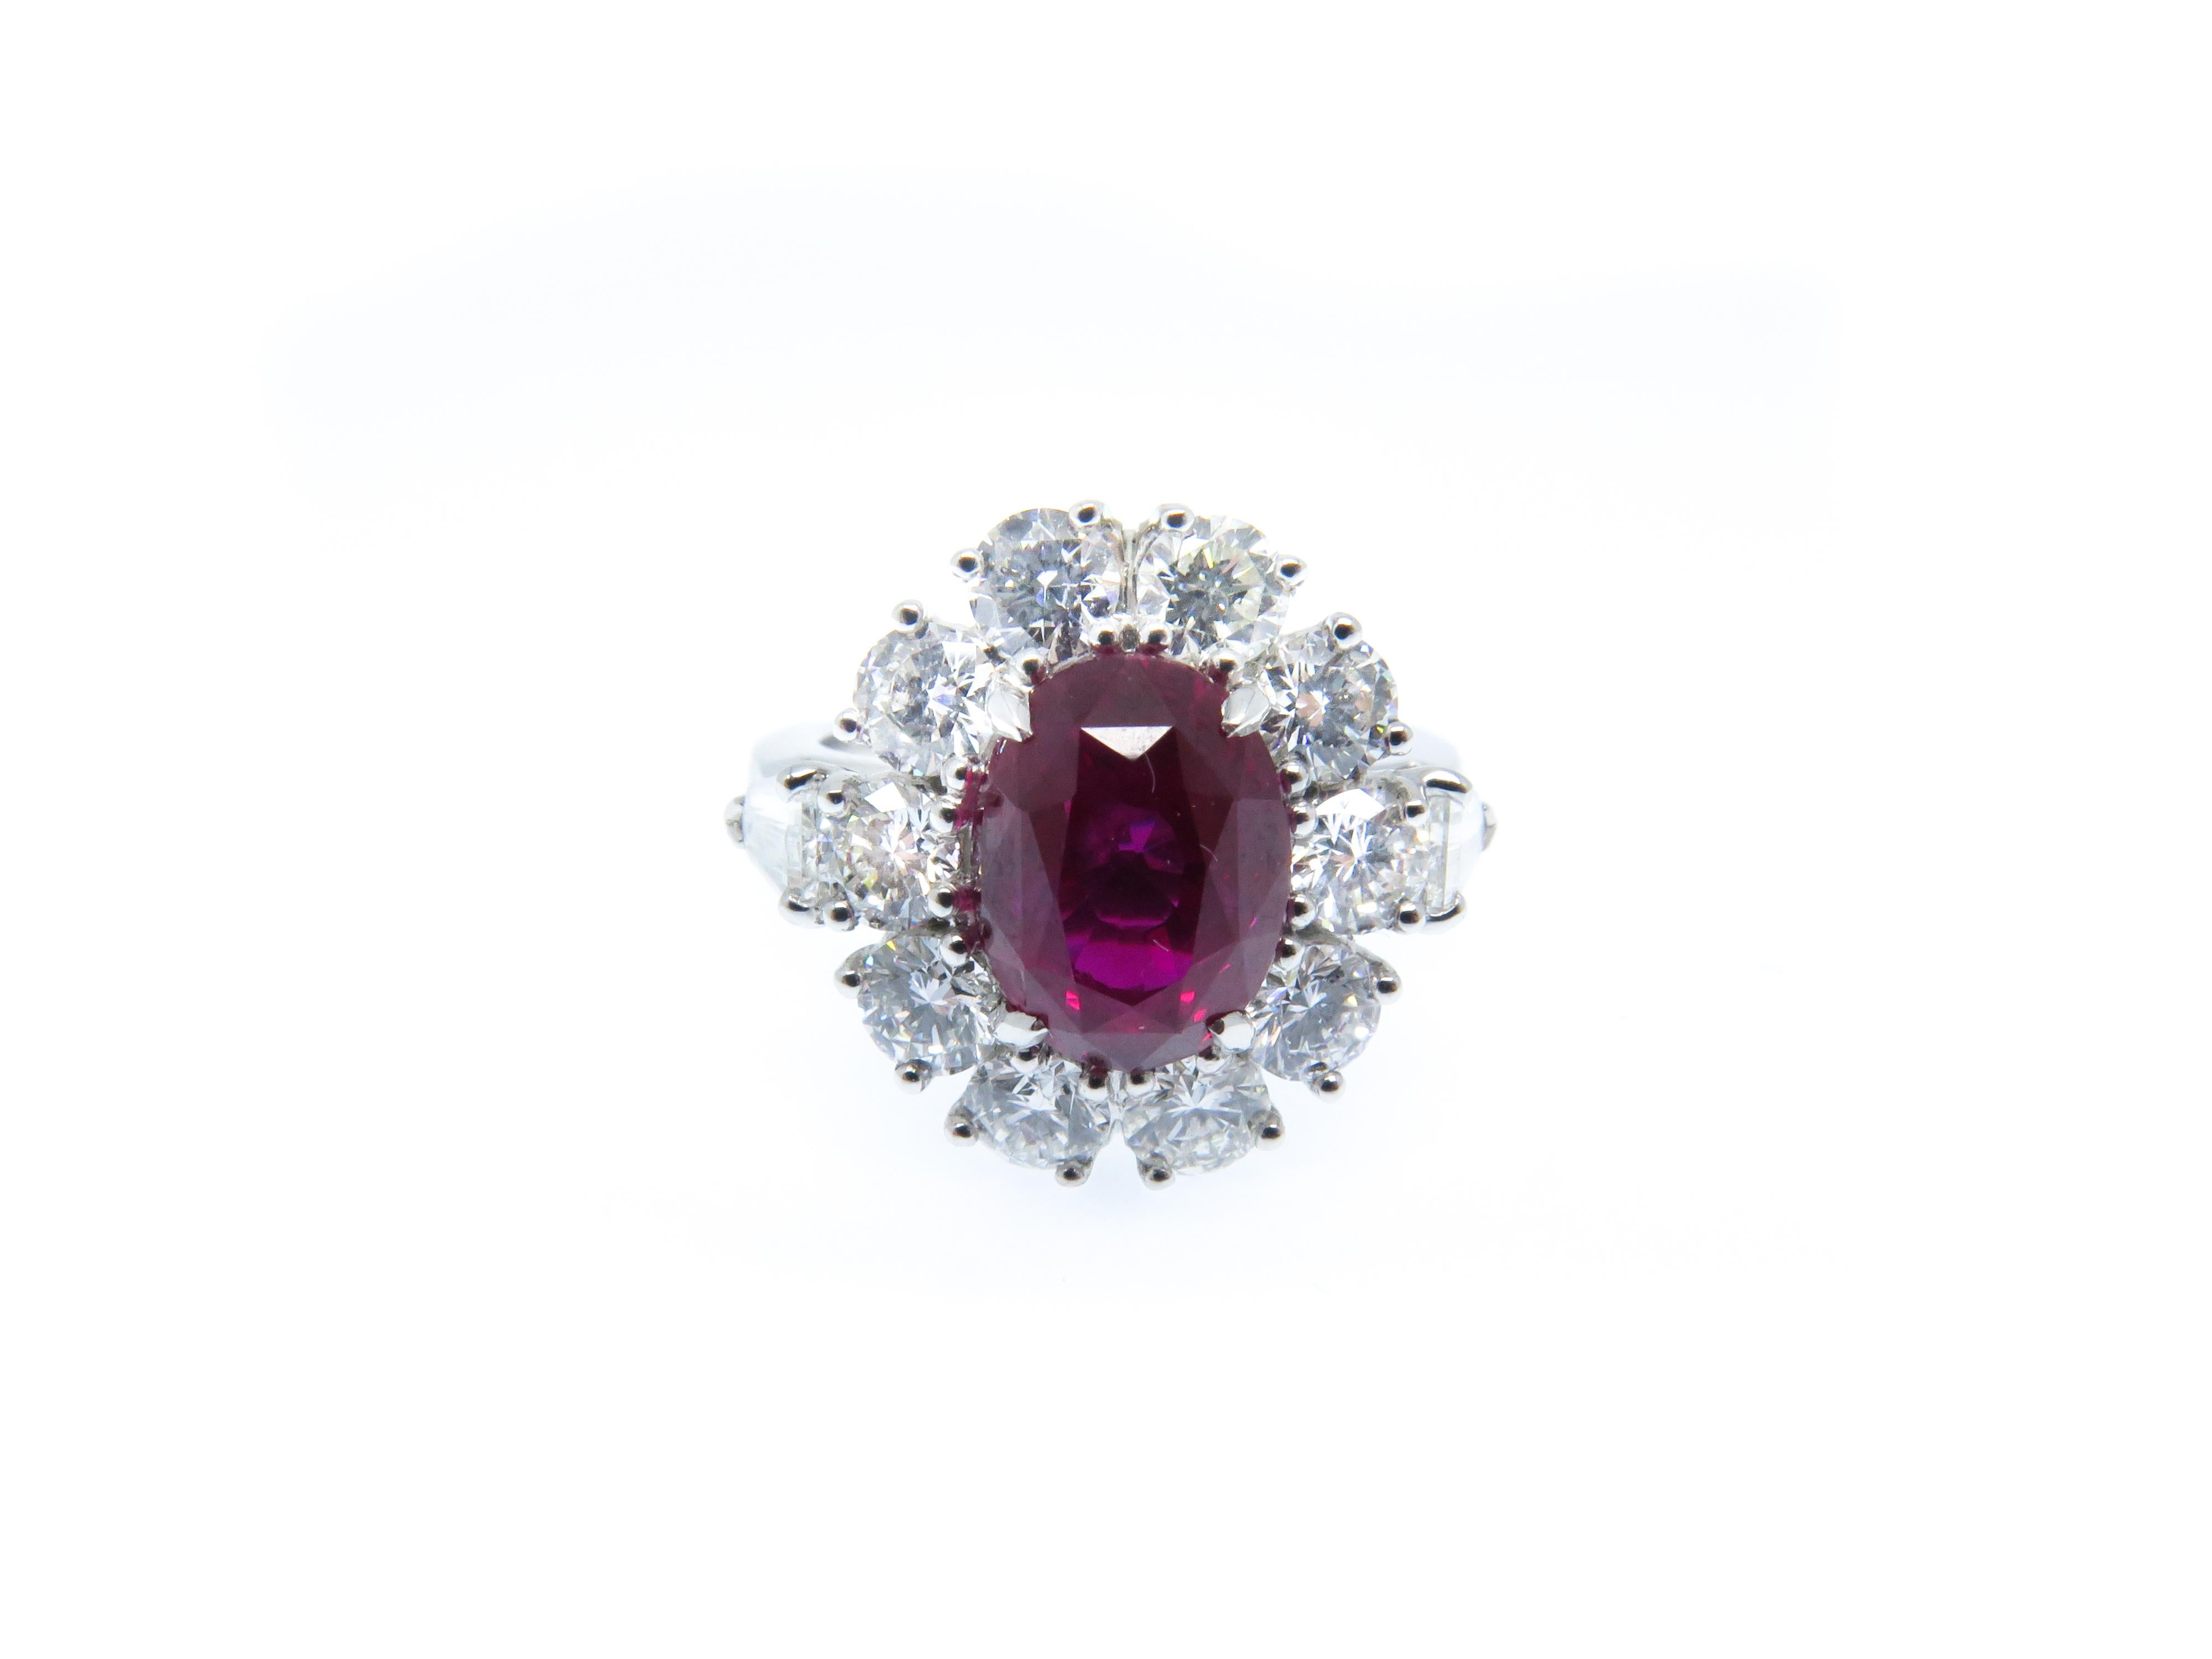 Ruby is a stone of divine creativity and symbol of good fortune, pure love, and loyalty. 

An impressive oval shape Mozambique Ruby weighing 3.57 carats centred within a brilliant cut diamond cluster weighing 1.55 carats. With tapered baguette